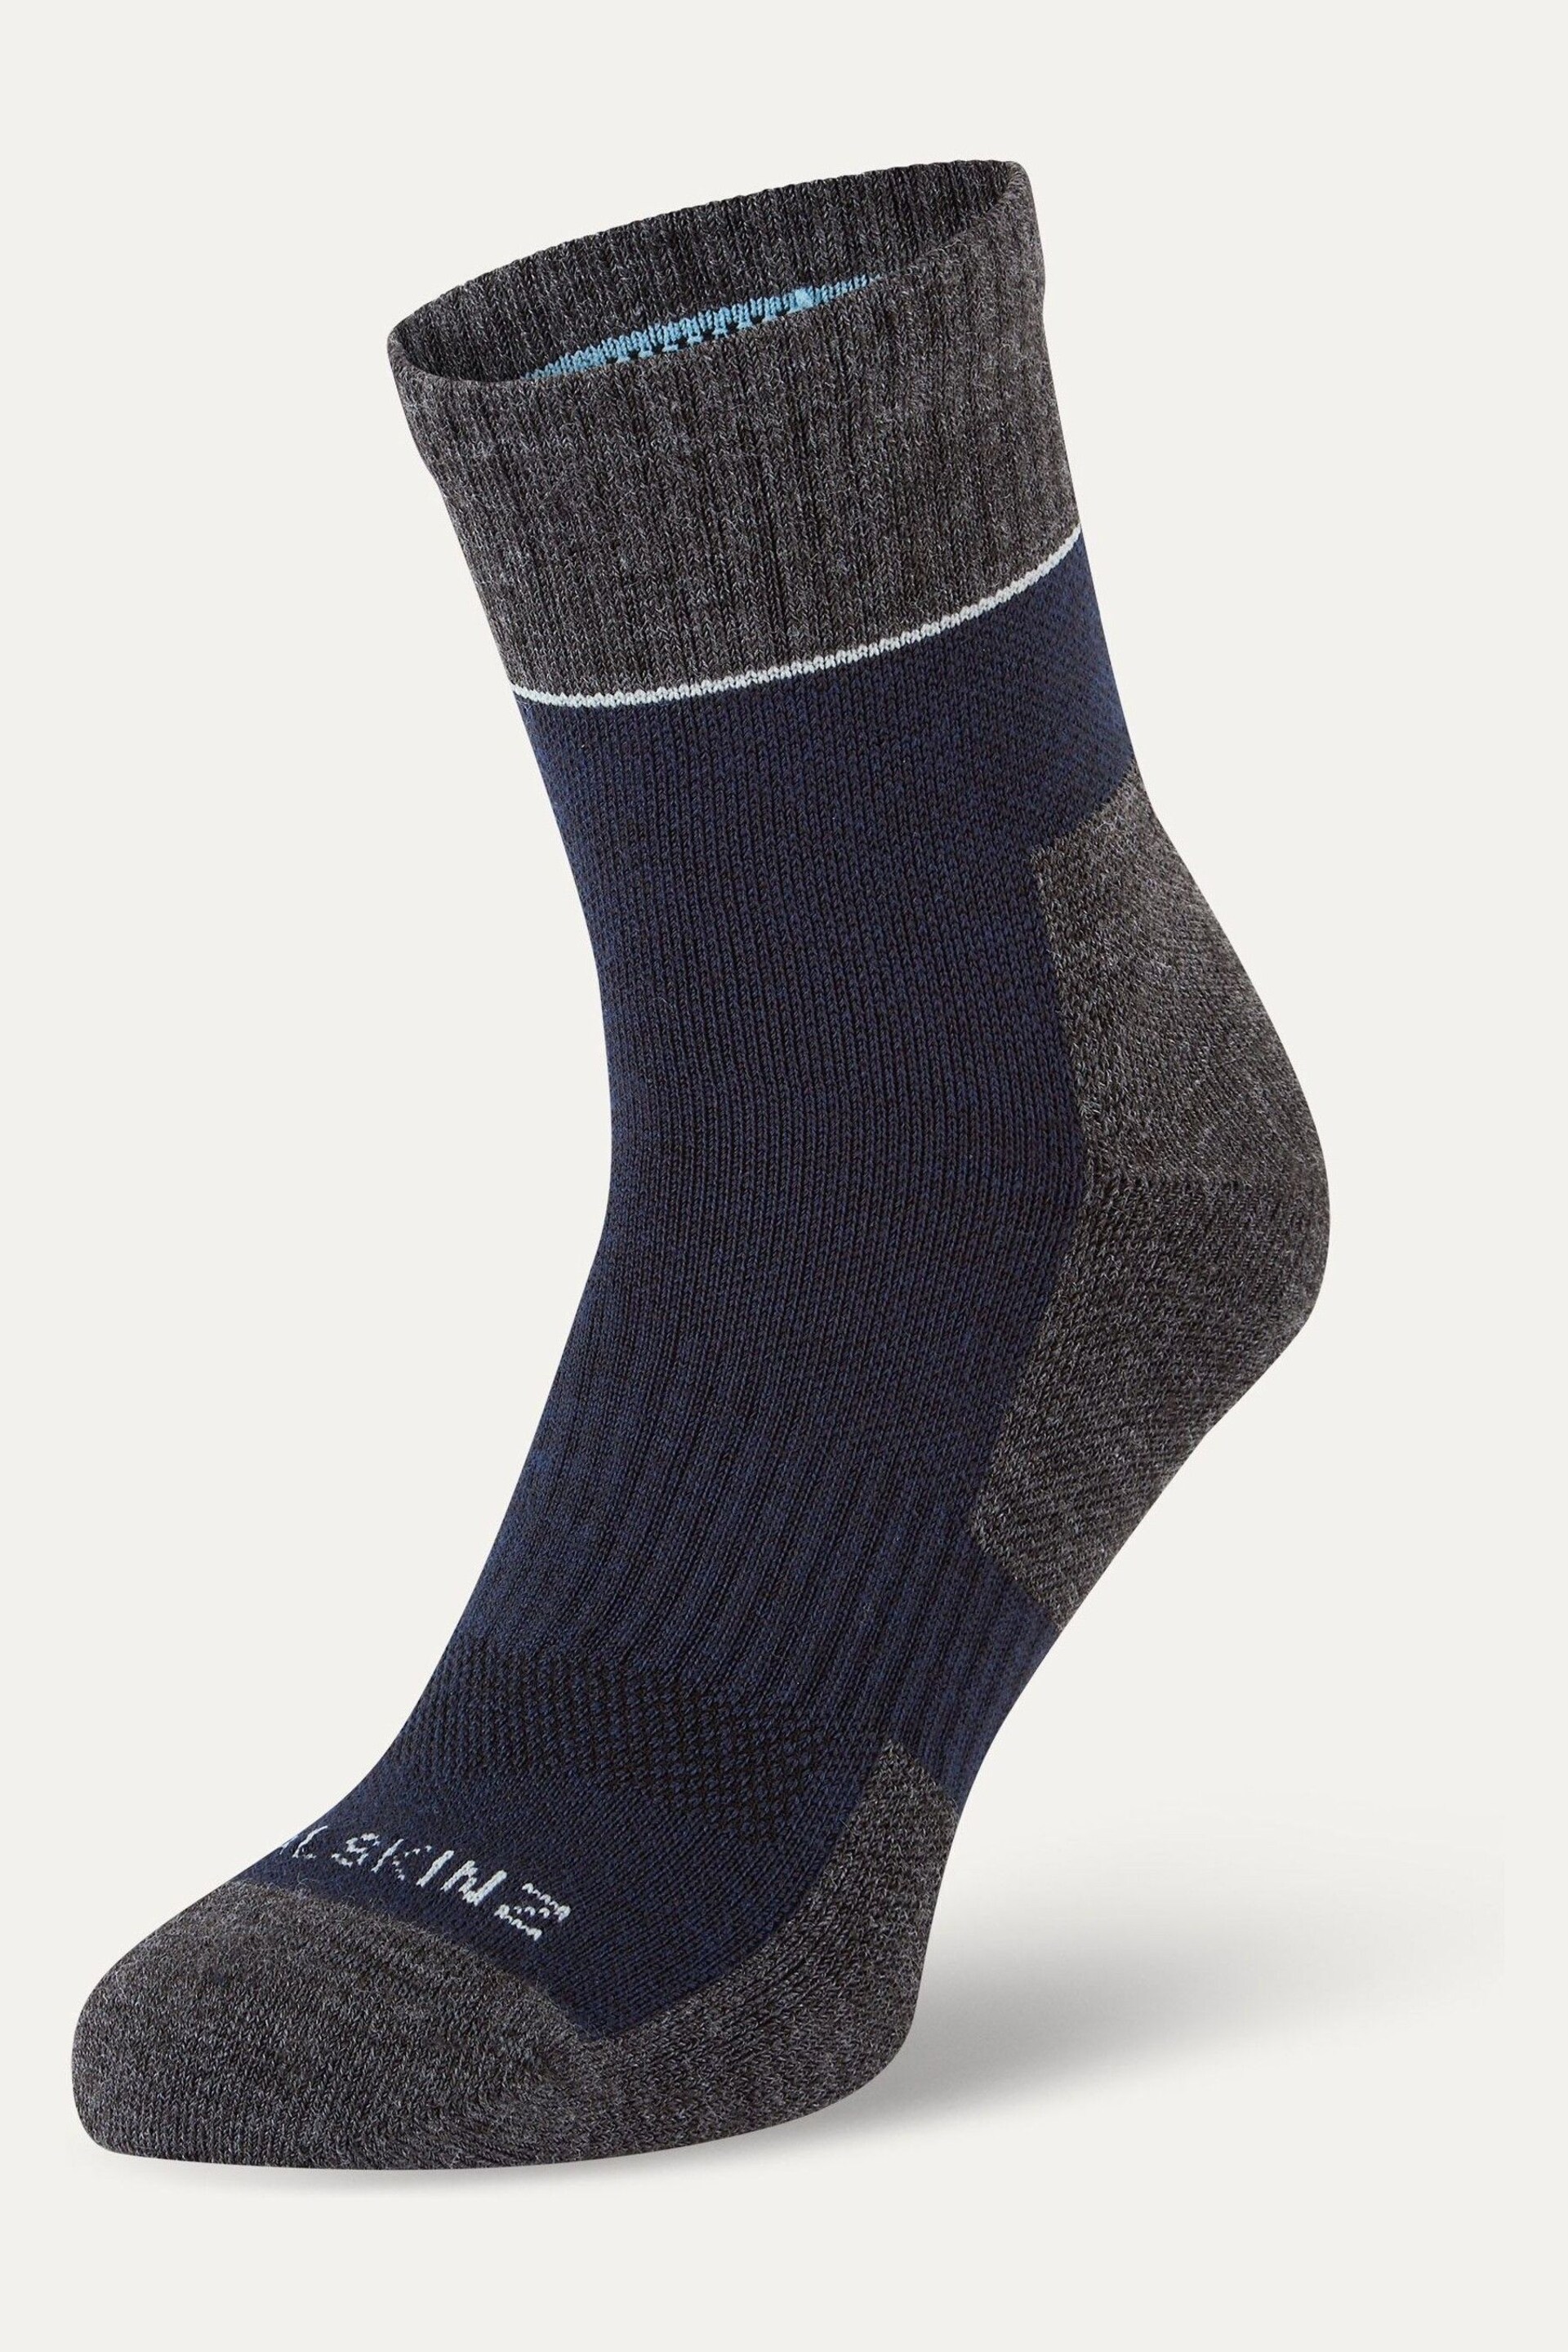 Sealskinz Morston Non-Waterproof Quickdry Ankle Length Socks - Image 1 of 2